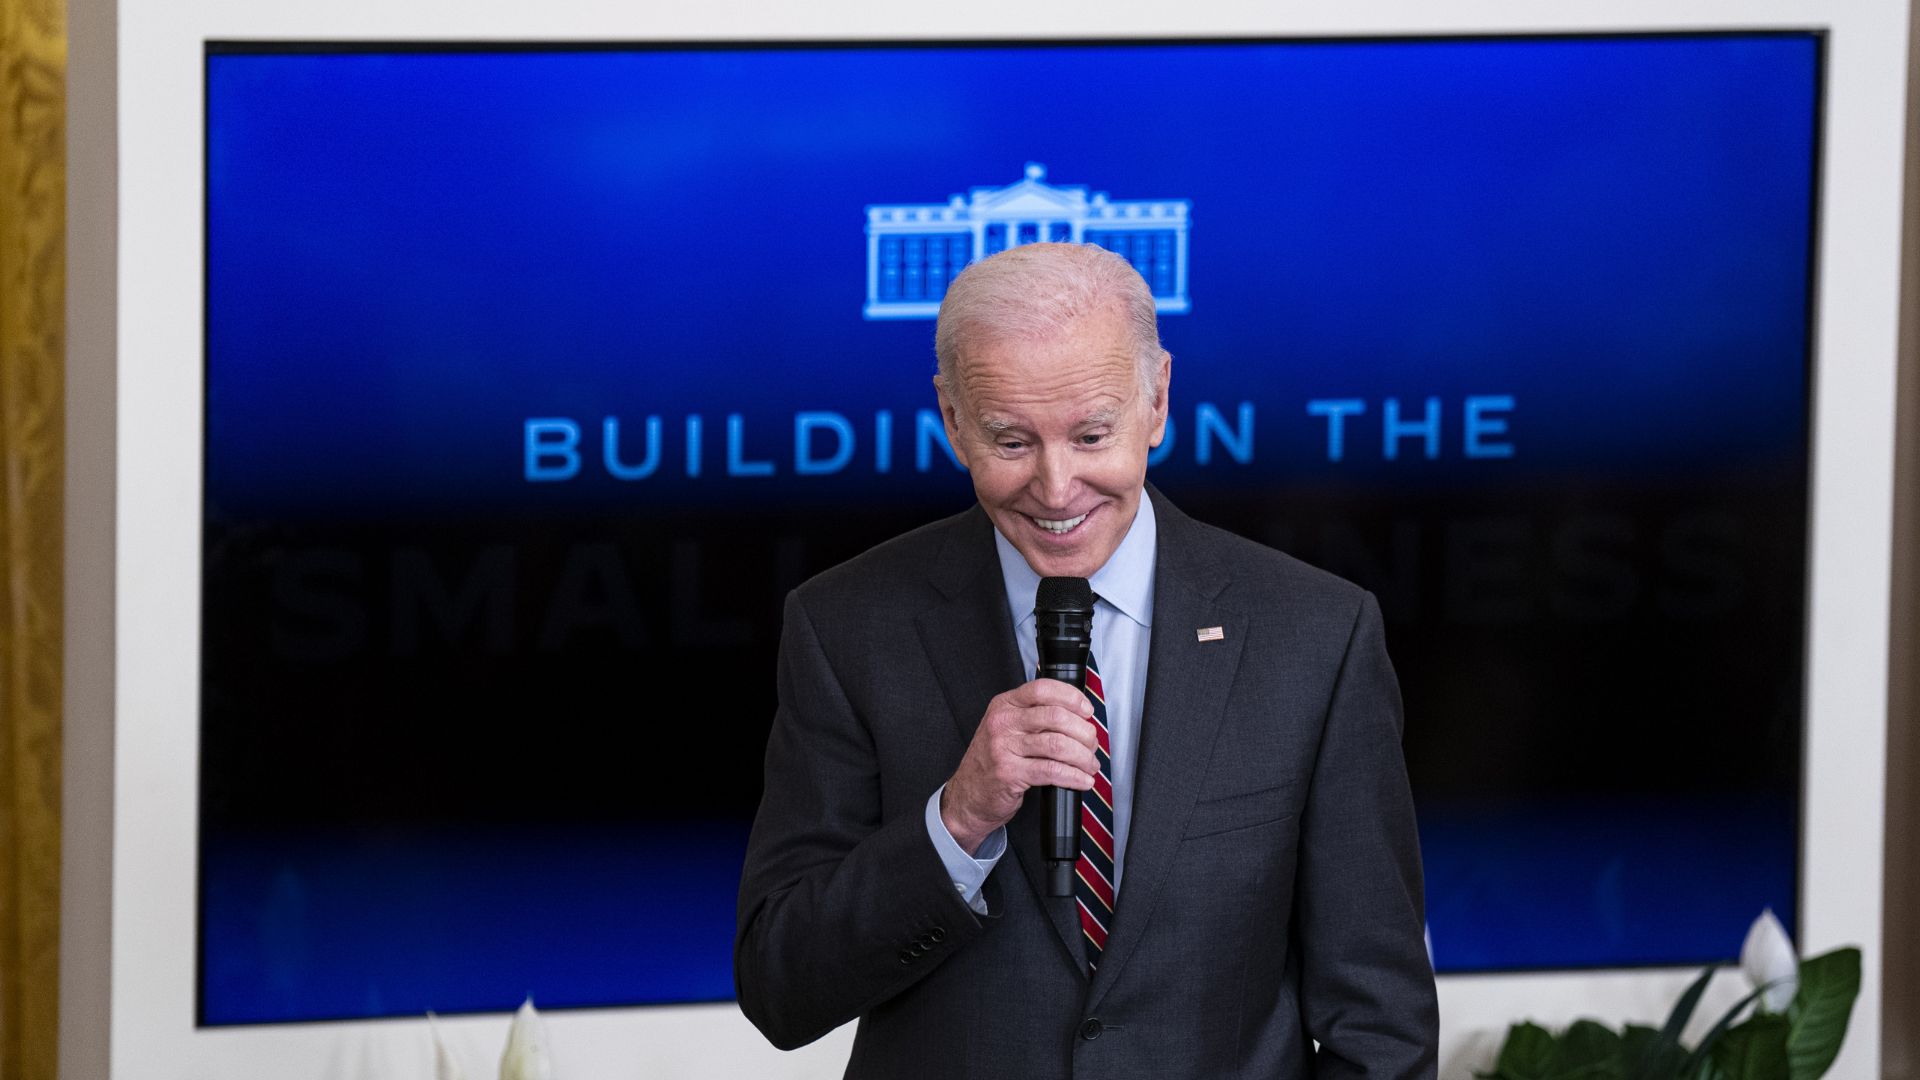 Don’t Let Biden’s All-Time Offensive Response To The Nashville Shooting Get Buried